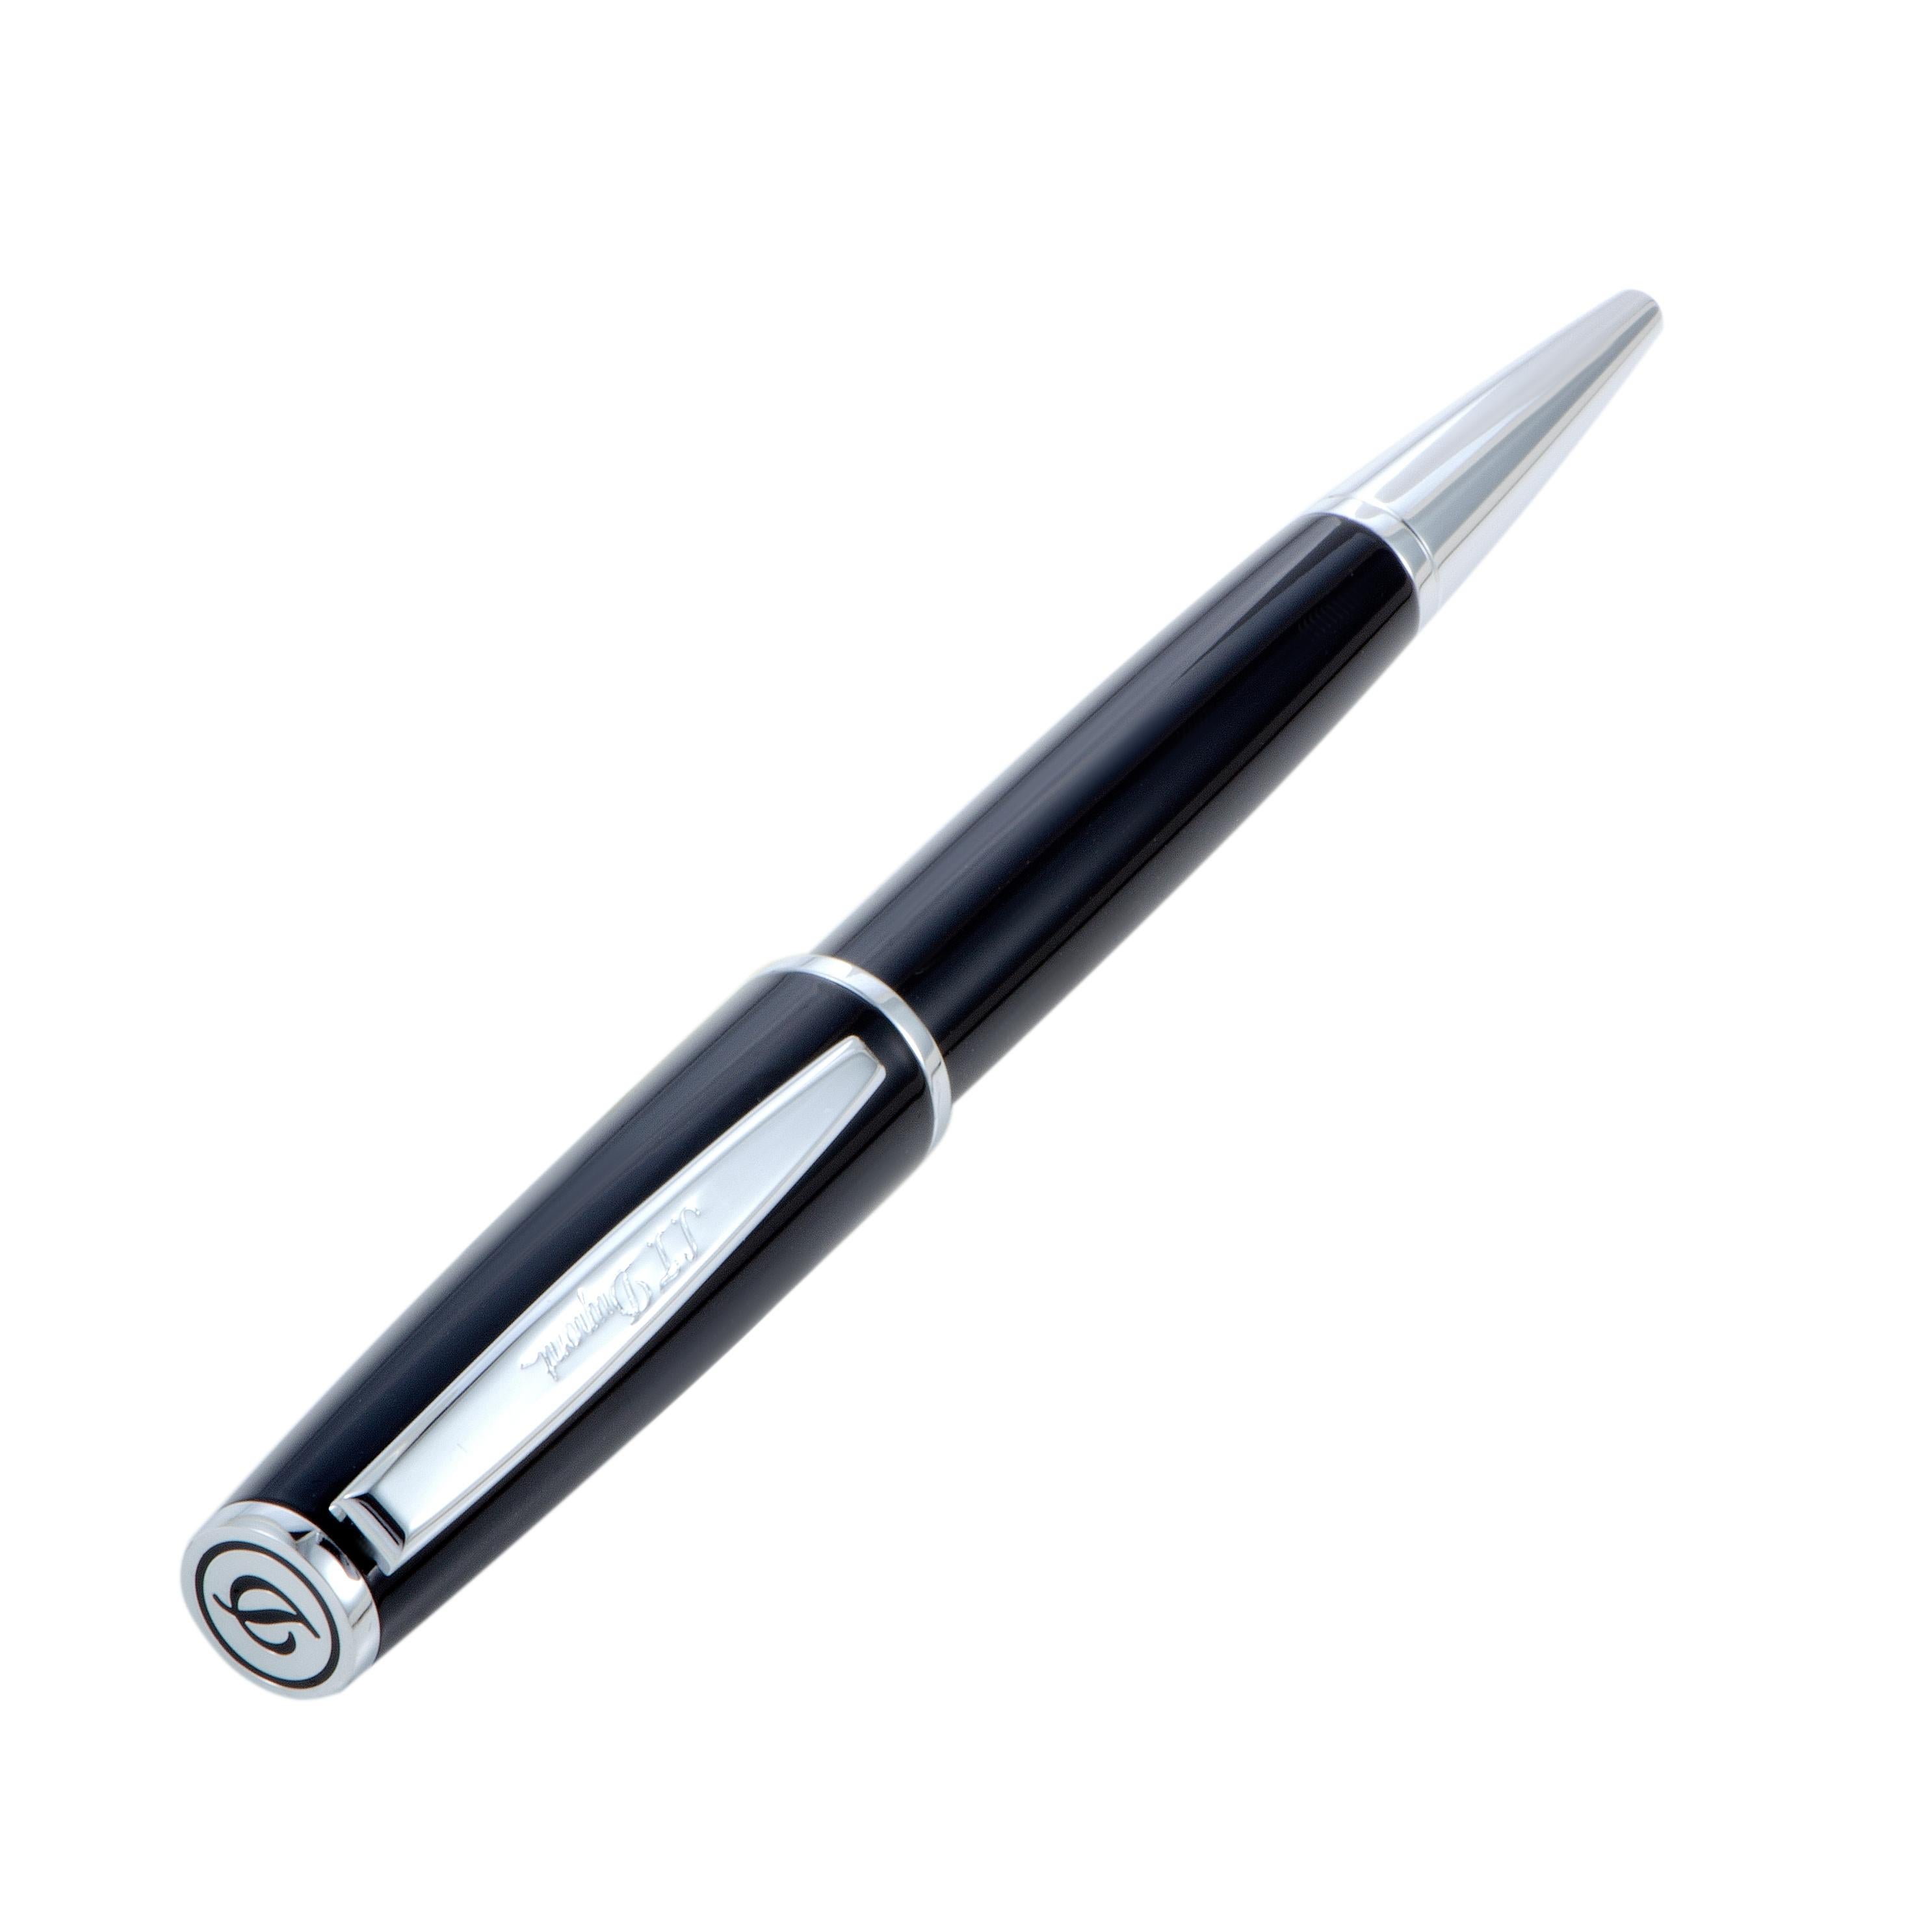 An epitome of ever-appealing classic elegance, this stylish pen is presented by S.T. Dupont and is a perfect accessory for a discerning gentleman who appreciates the subtle beauty of understated design and décor. The pen is accented with a luxe